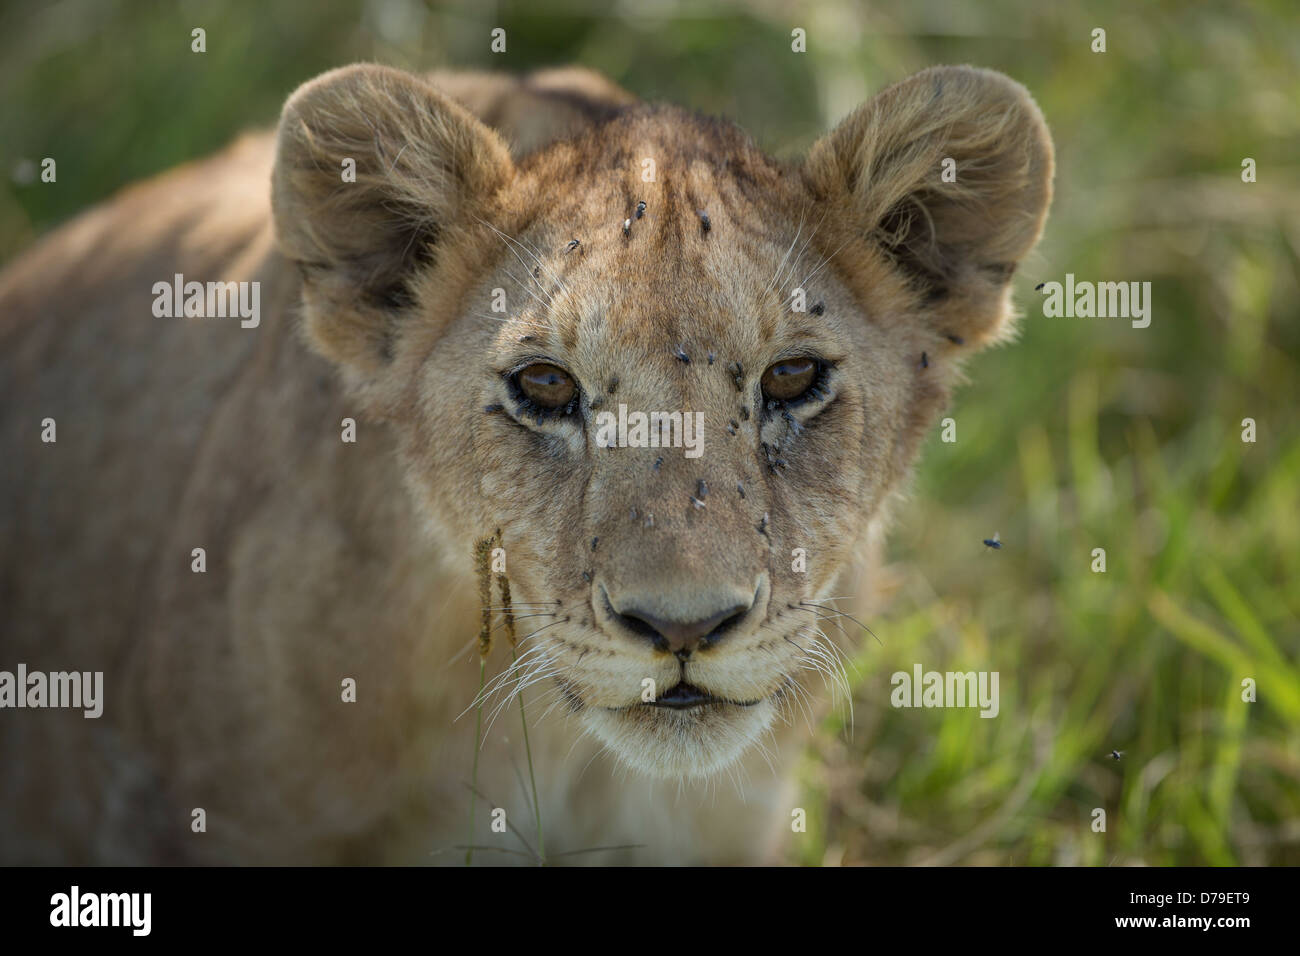 young lion portrait covered with flies Stock Photo